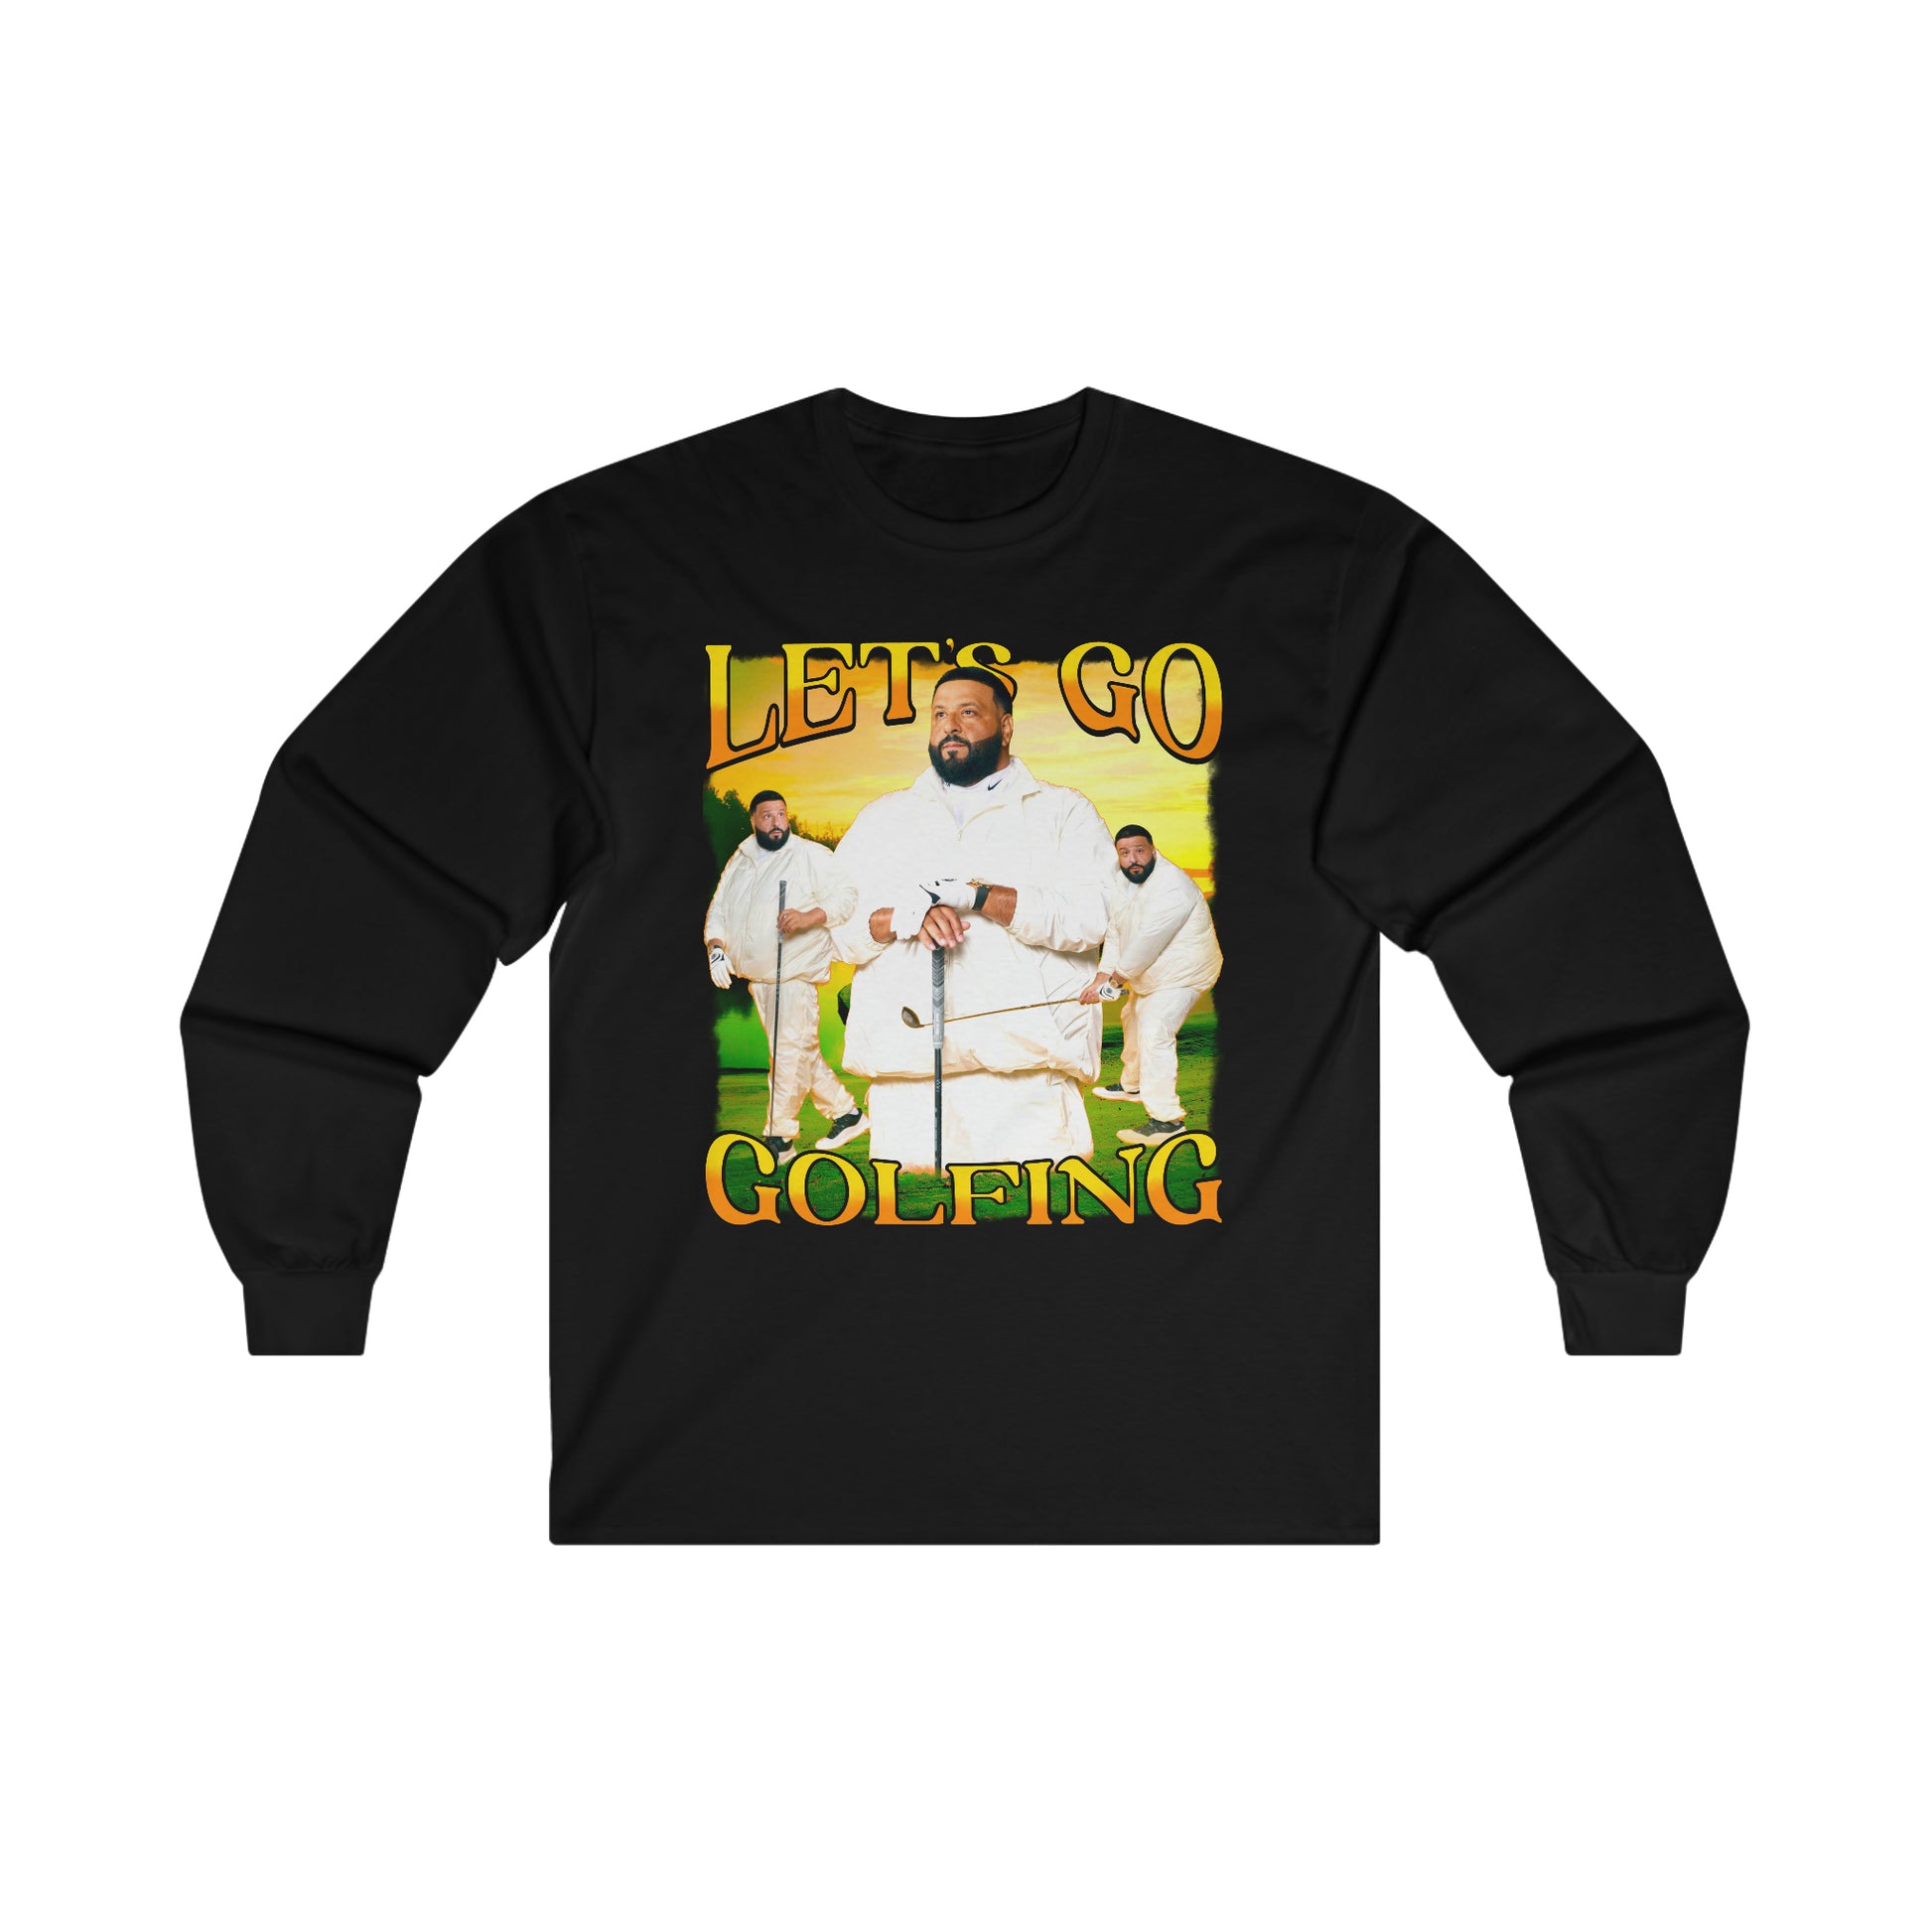 LET'S GO GOLFING – Funny Ahh Tees